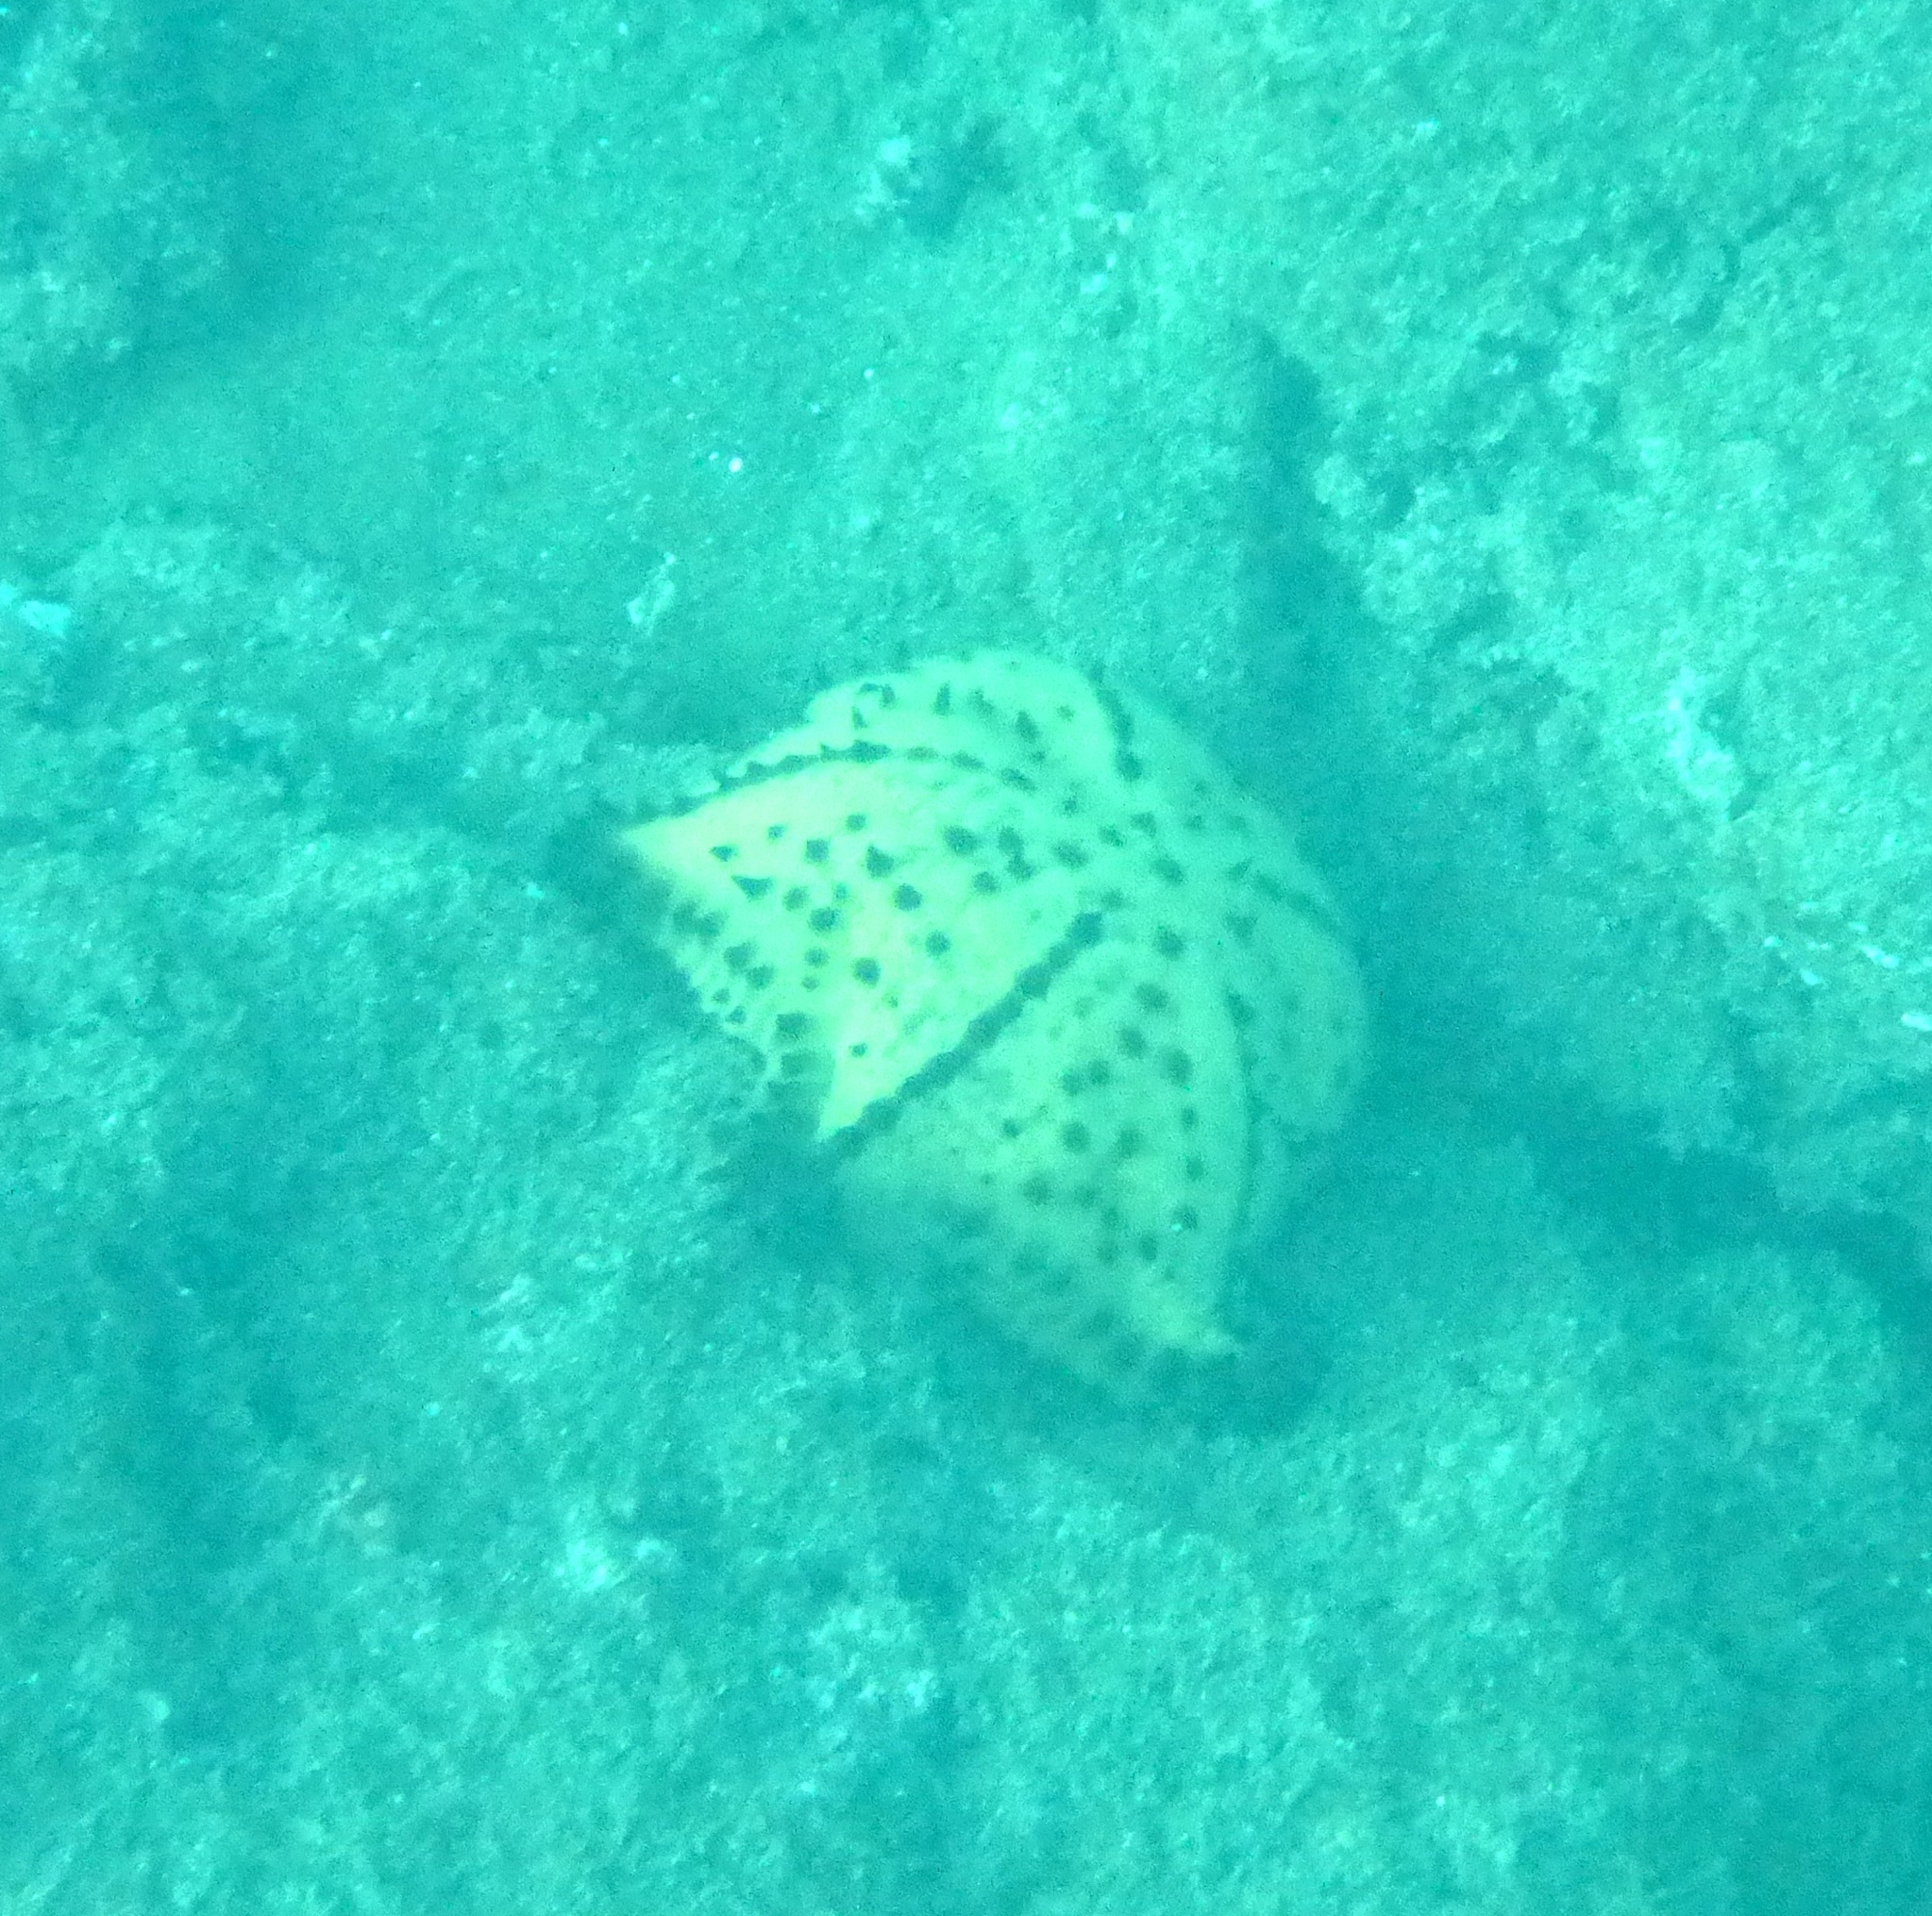 A chocolate chip starfish.  Starfish like colder water so I actually had to dive down to get a picture of this one.  